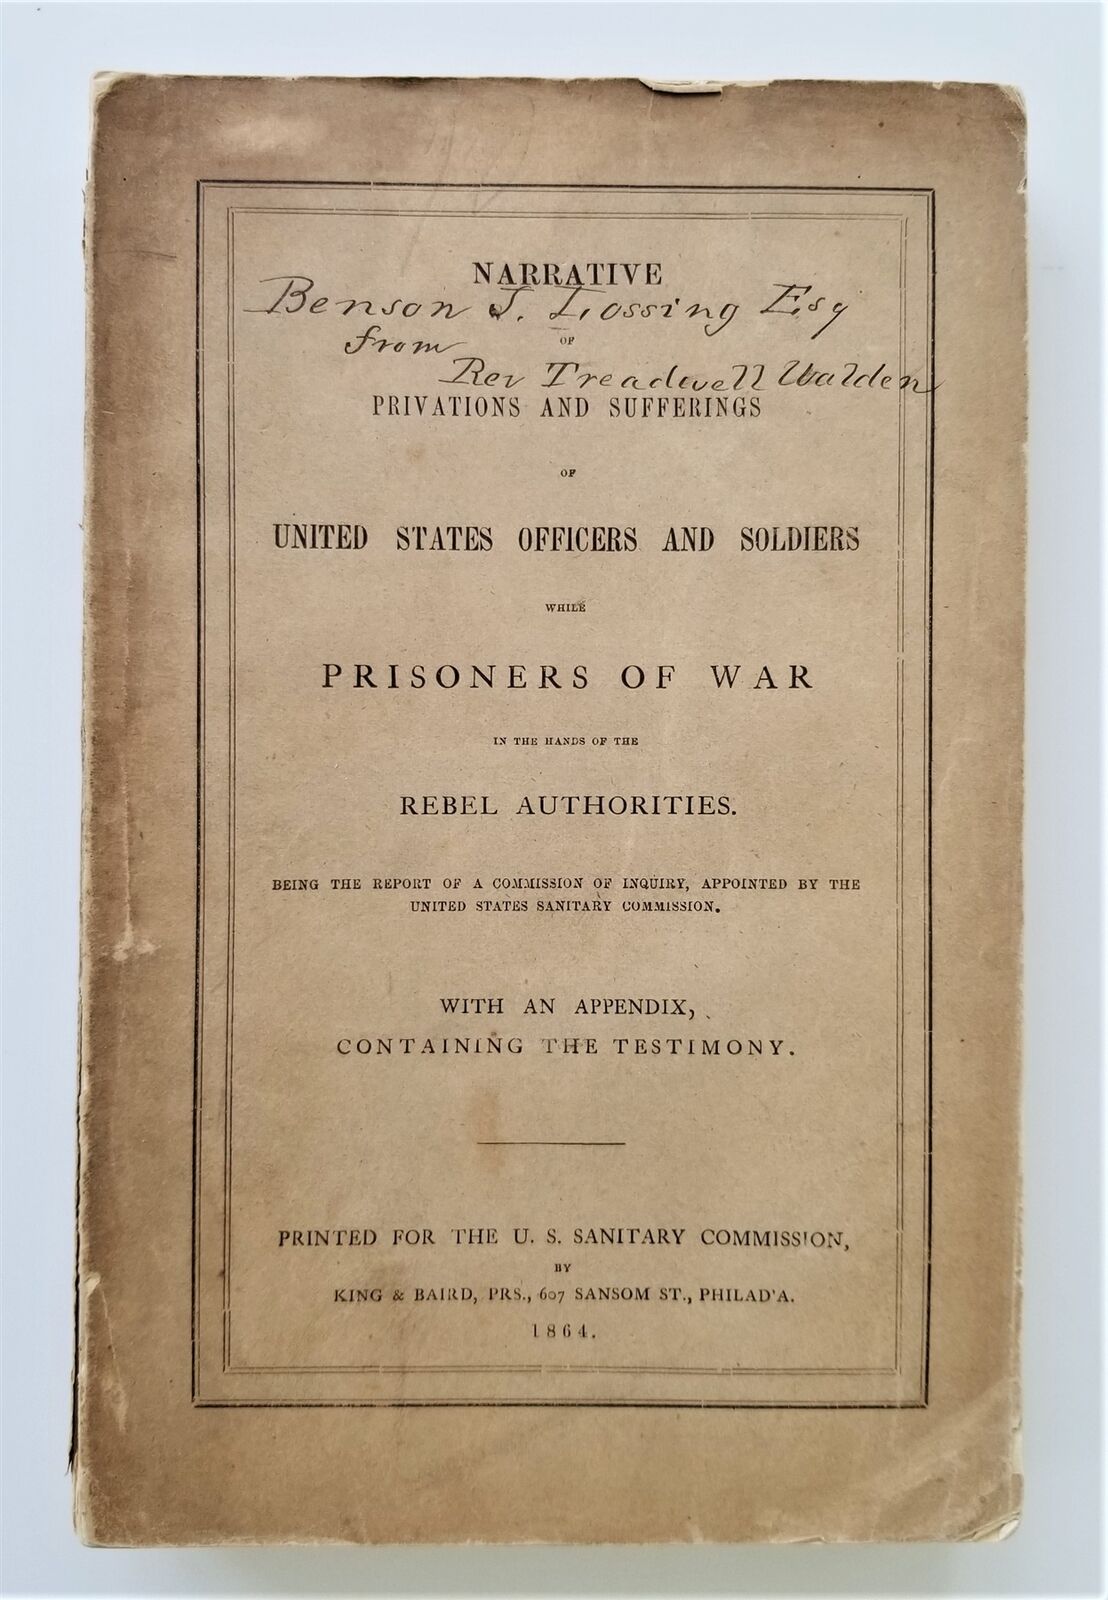 1864 antique CIVIL WAR PRISONERS privations sufferings REBEL AUTH owned lossing